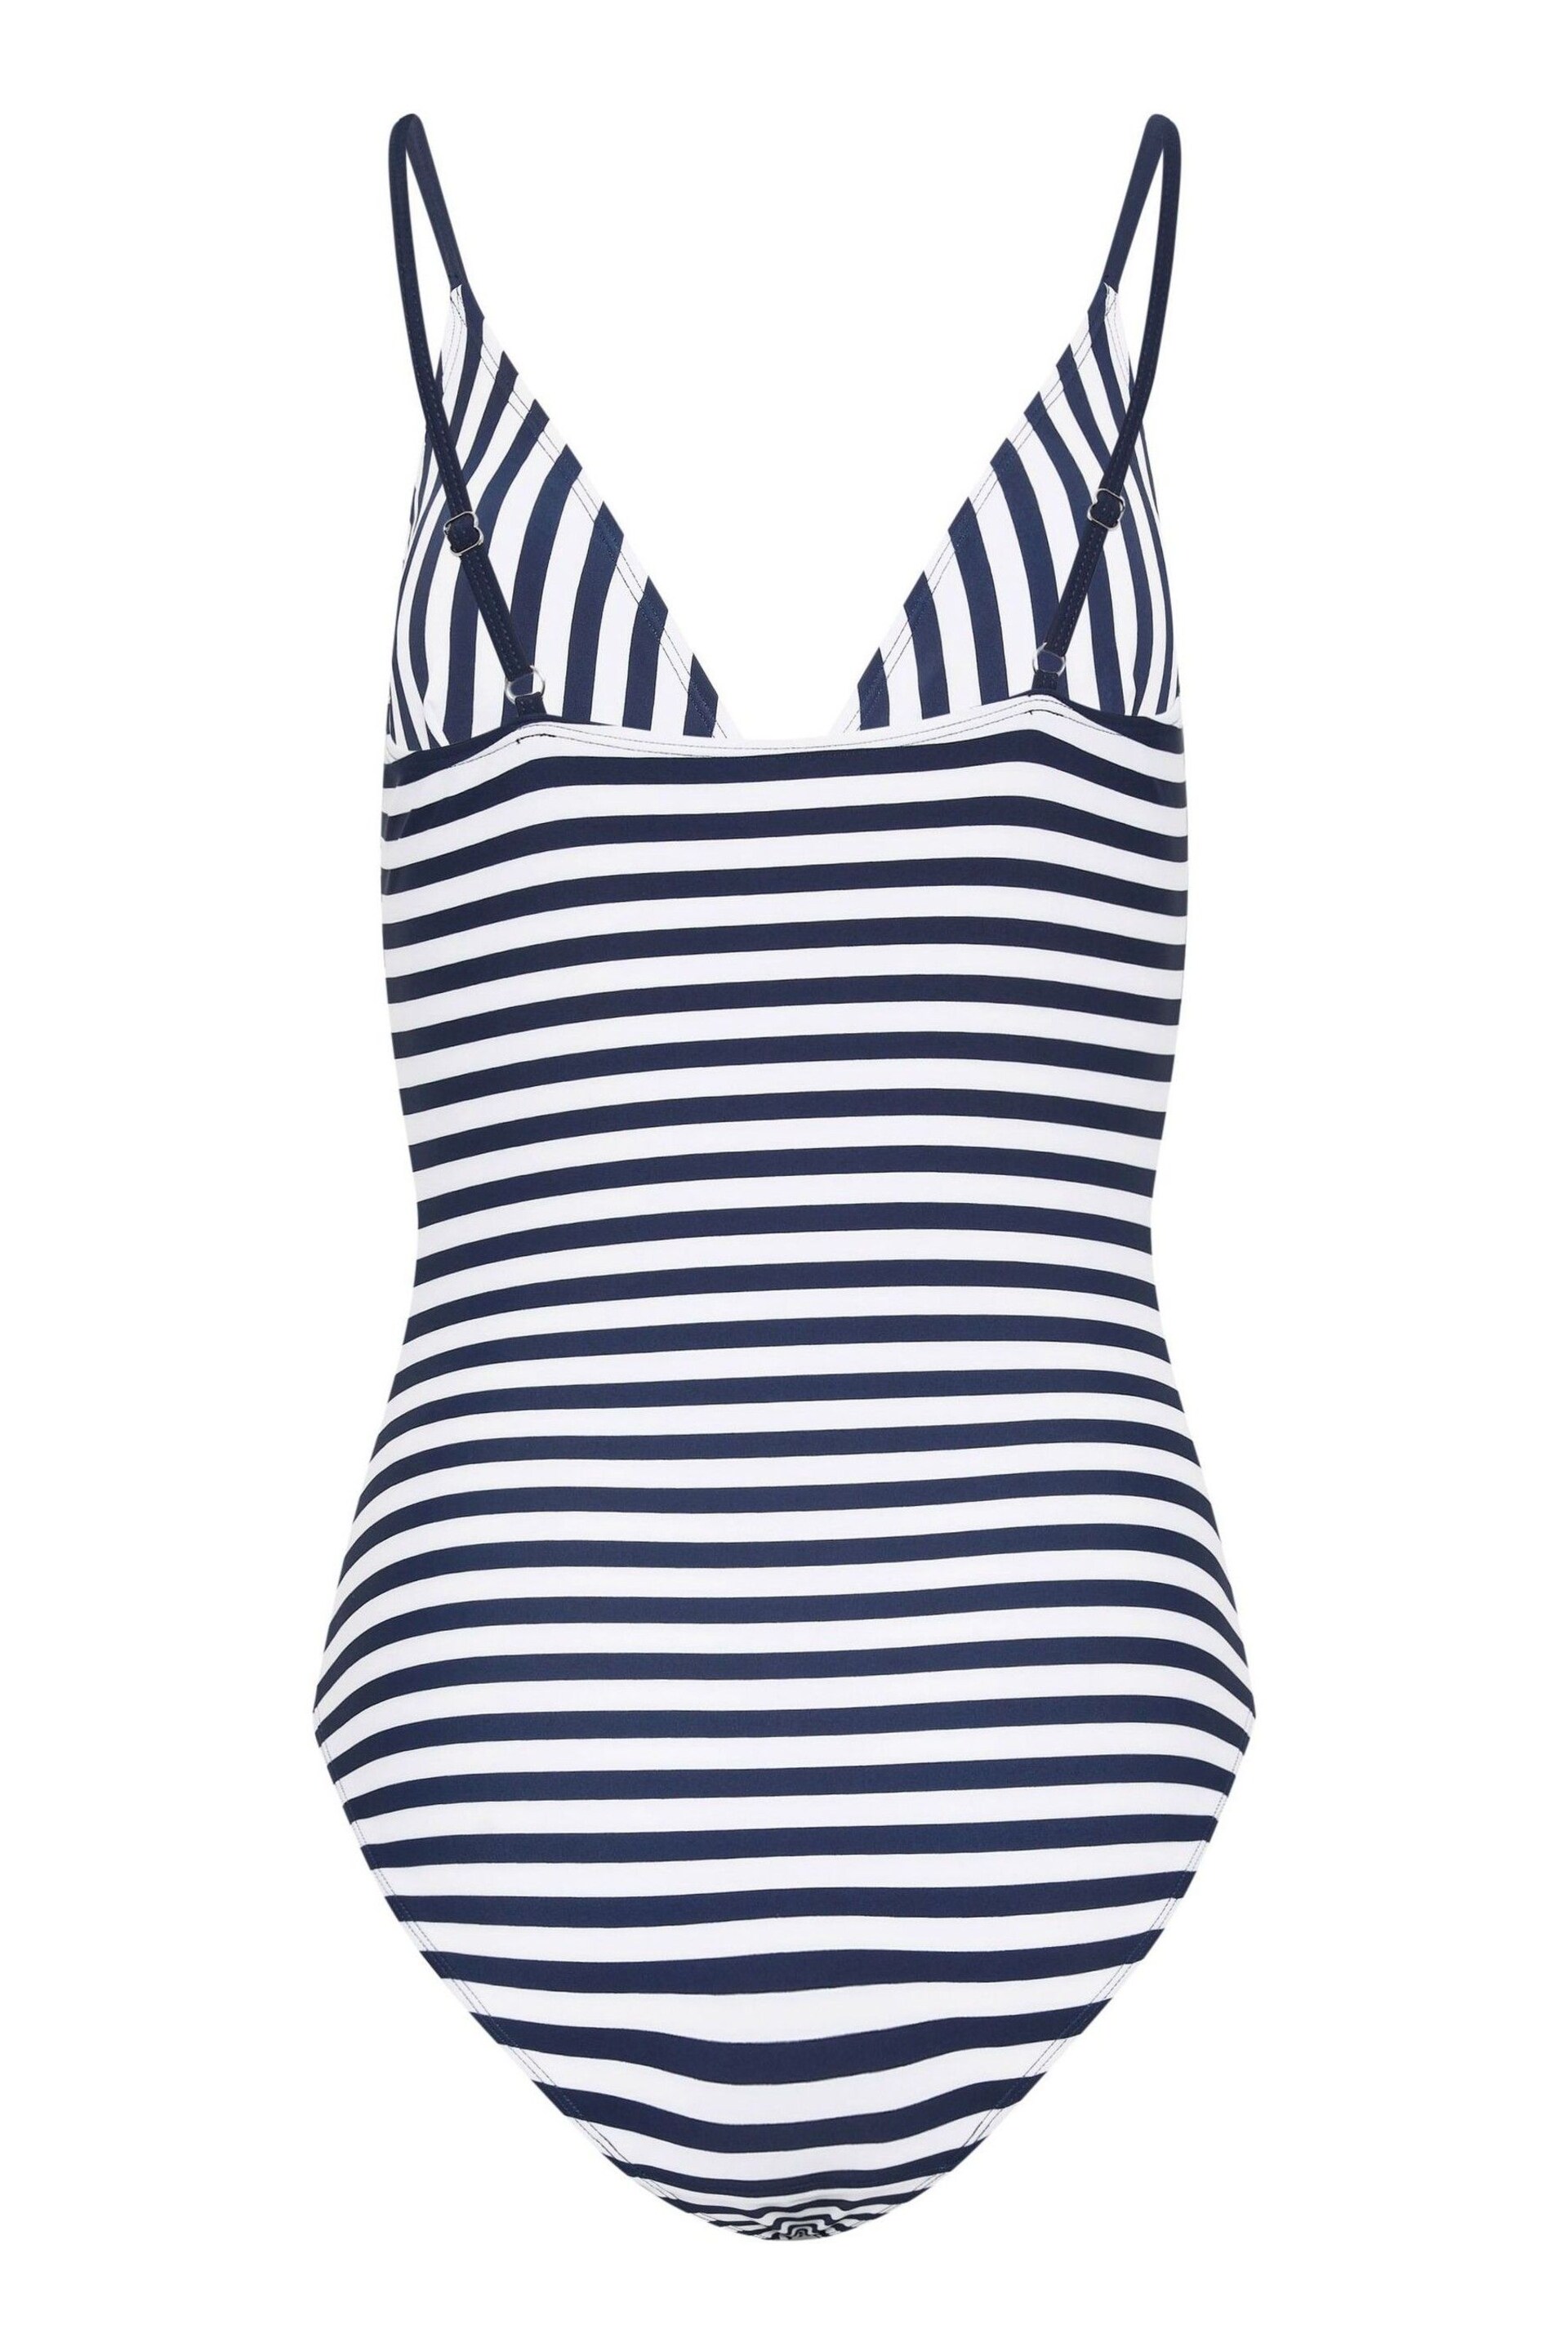 Long Tall Sally Blue LTS Tall Navy Blue Stripe V-Neck Swimsuit - Image 6 of 6